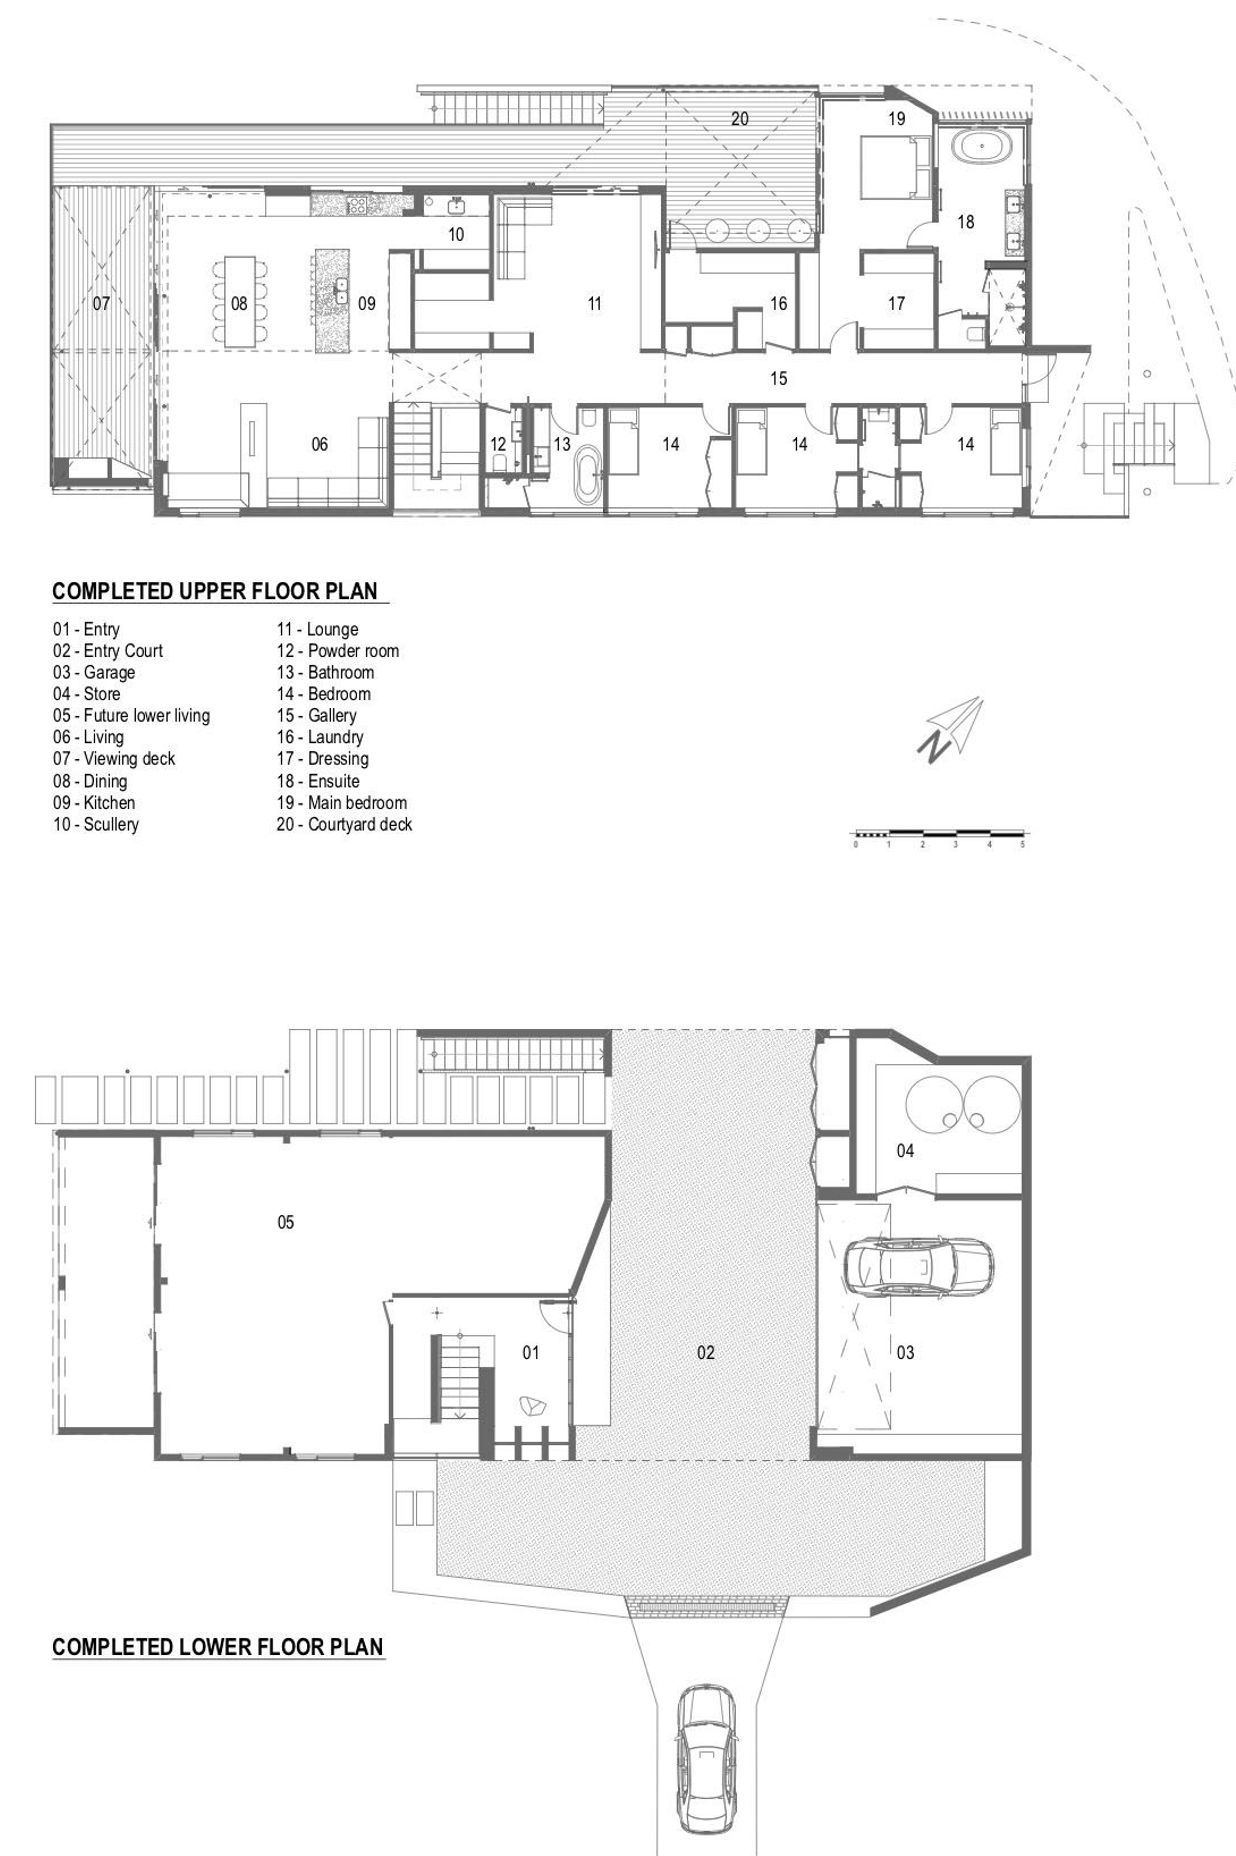 The upper and lower floor plans of the completed home, by  Lloyd Hartley.